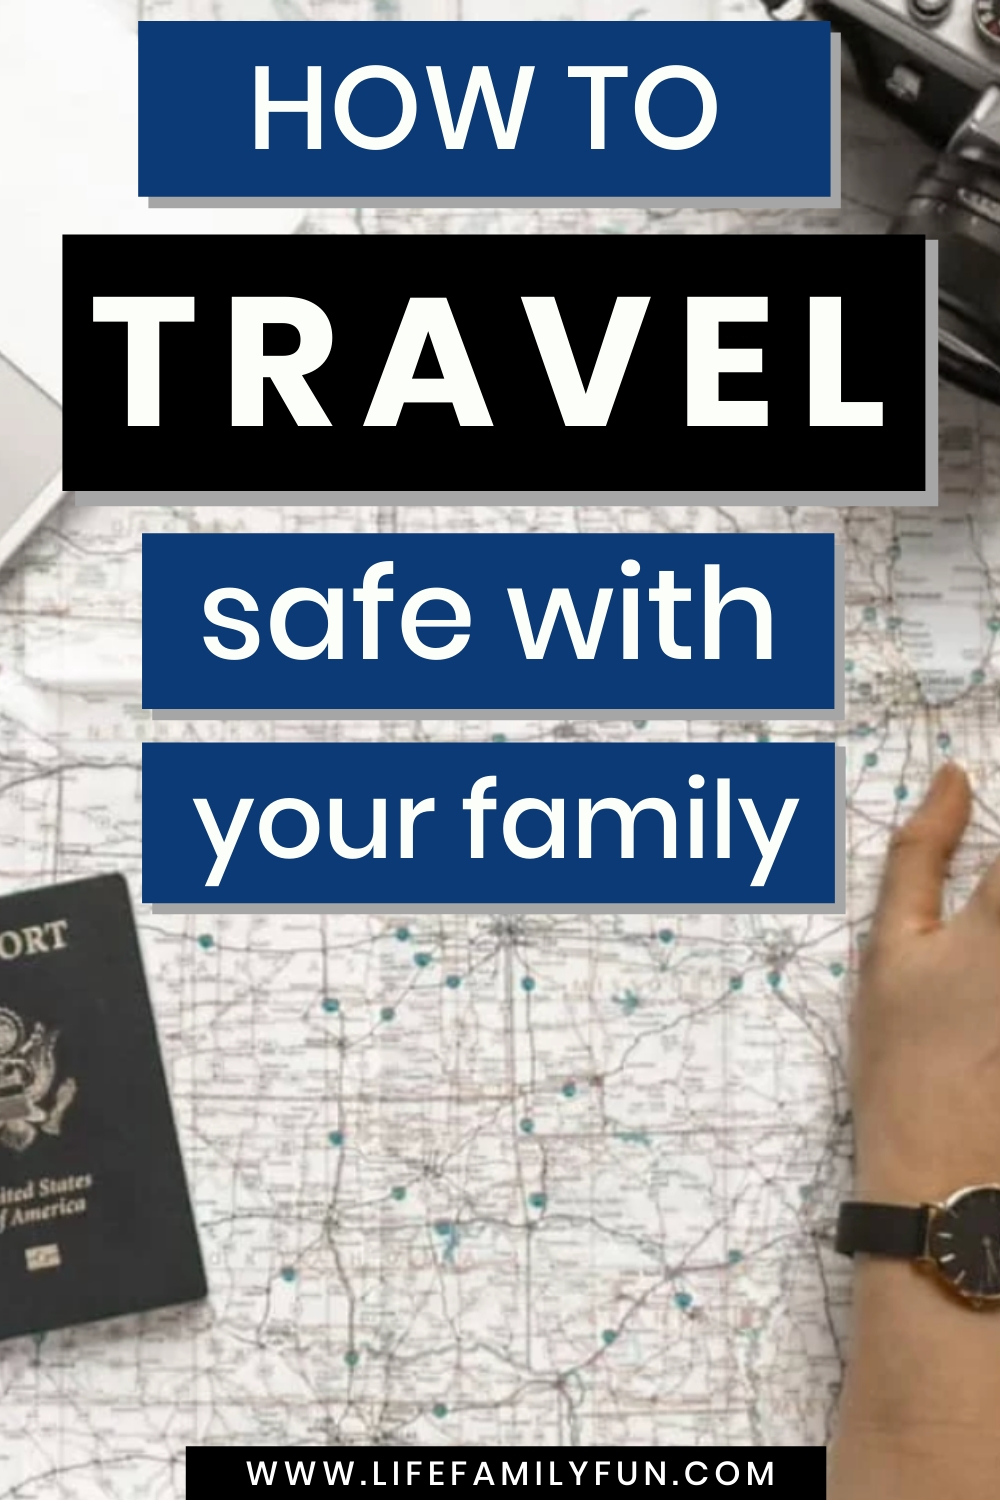 How To Travel Safe With Your Family – 5 Important Travel Tips To Keep In Mind